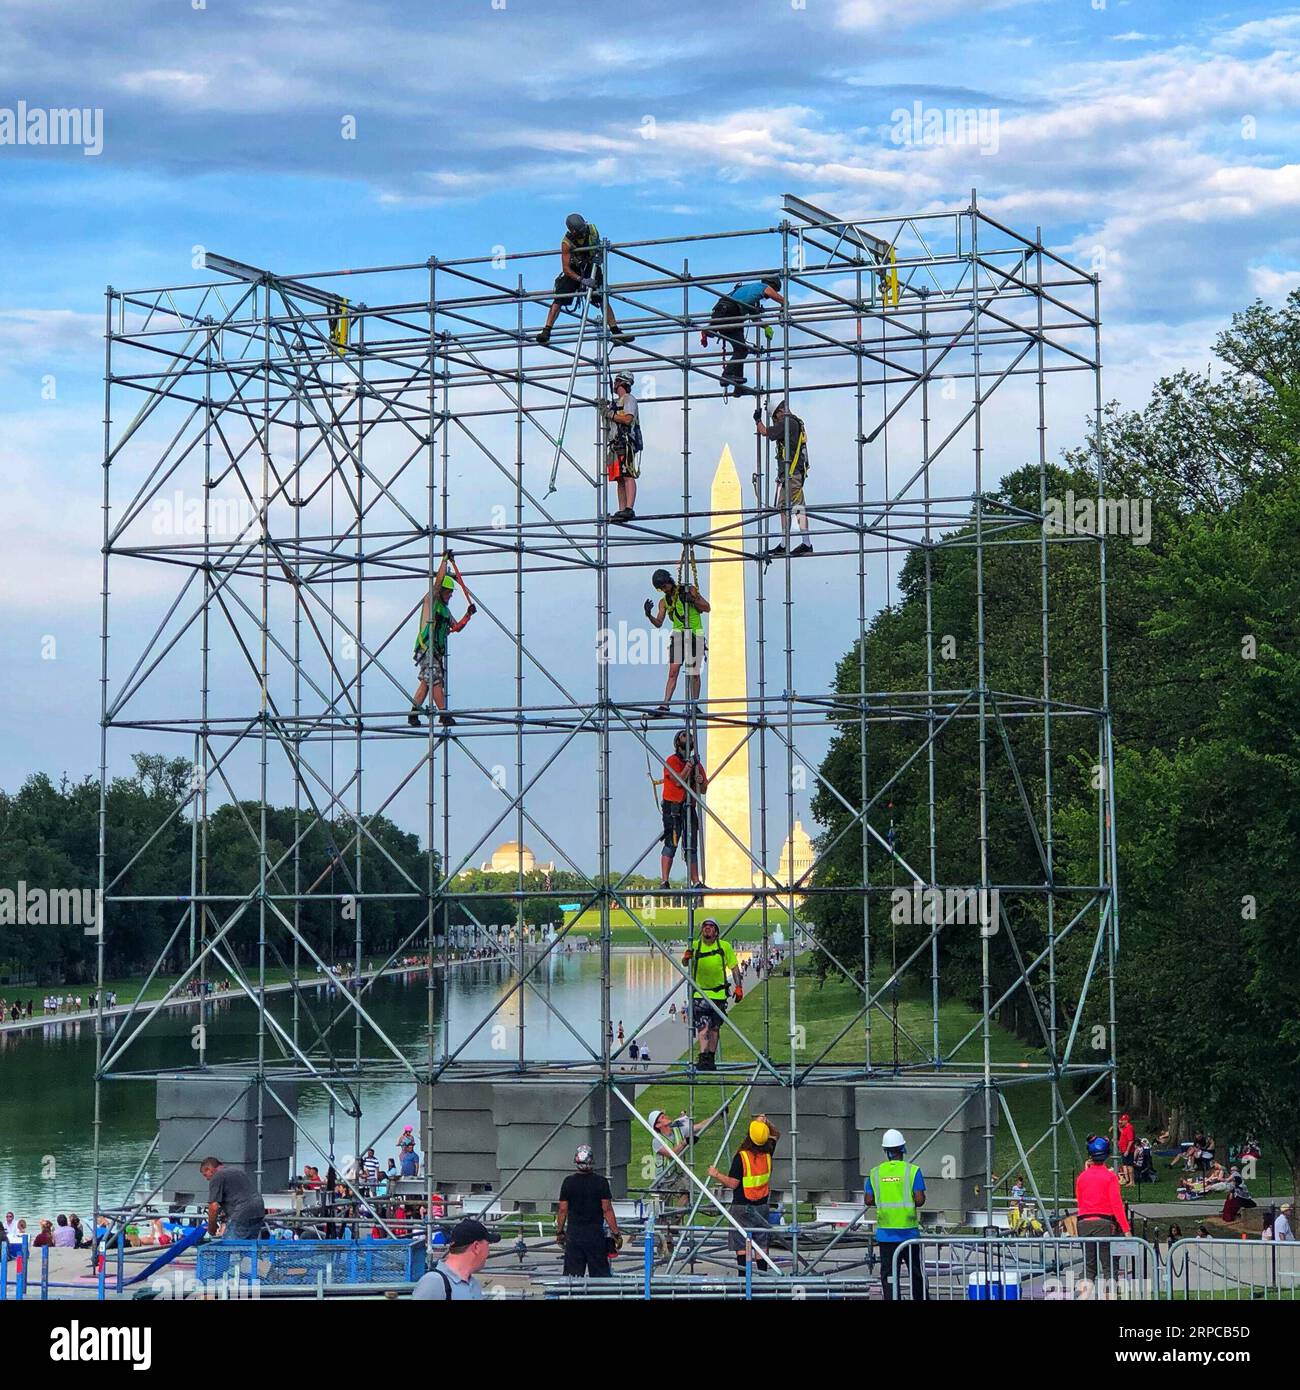 (190630) -- WASHINGTON, June 30, 2019 -- Photo taken with a mobile phone shows people working on a scaffold near the Washington Monument in Washington D.C., the United States, June 29, 2019. ) U.S.-WASHINGTON D.C.-SUMMER LiuxJie PUBLICATIONxNOTxINxCHN Stock Photo